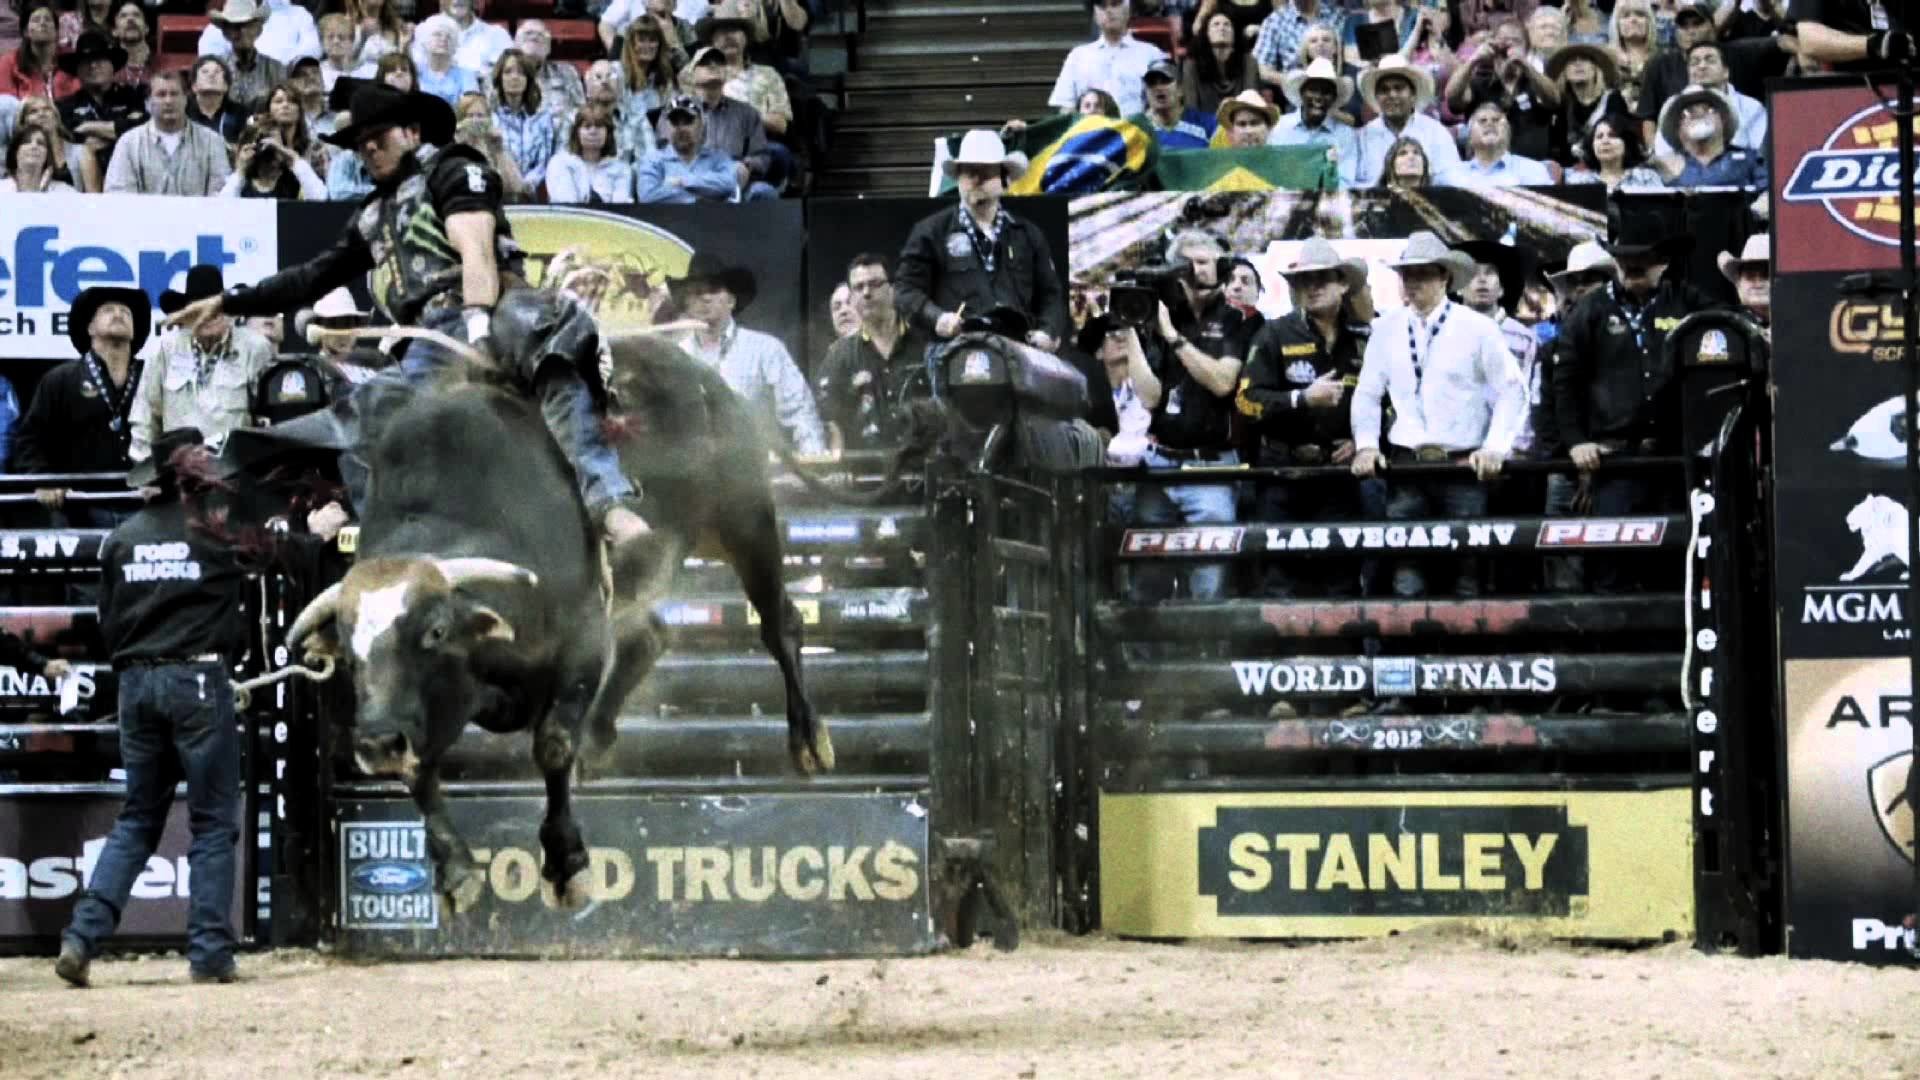 1920x1080 Images For > Pbr Bull Riding 2014